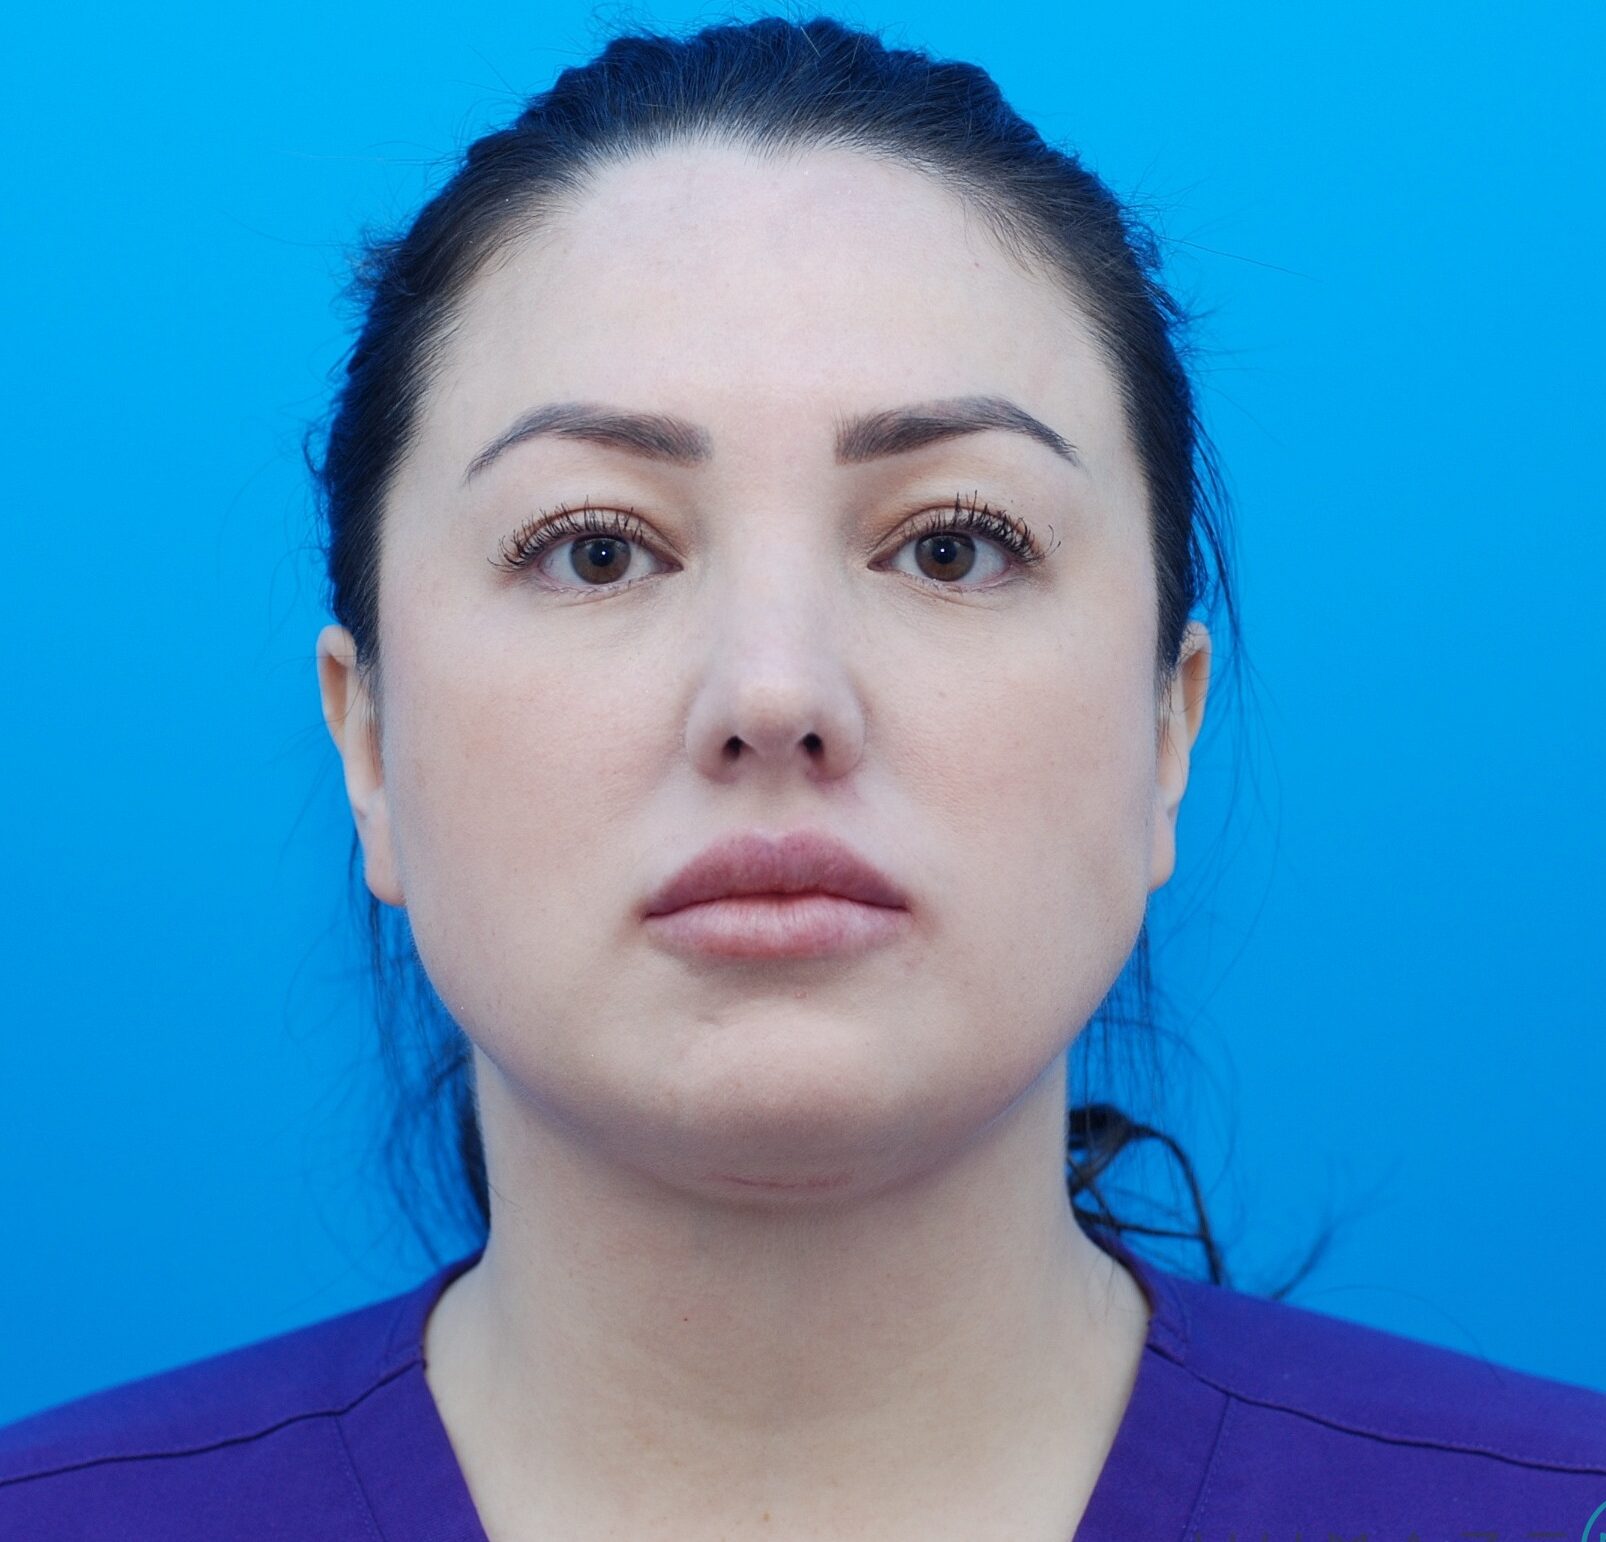 Neck Lift / Rhinoplasty / Buccal Fat Removal / Lip Filler